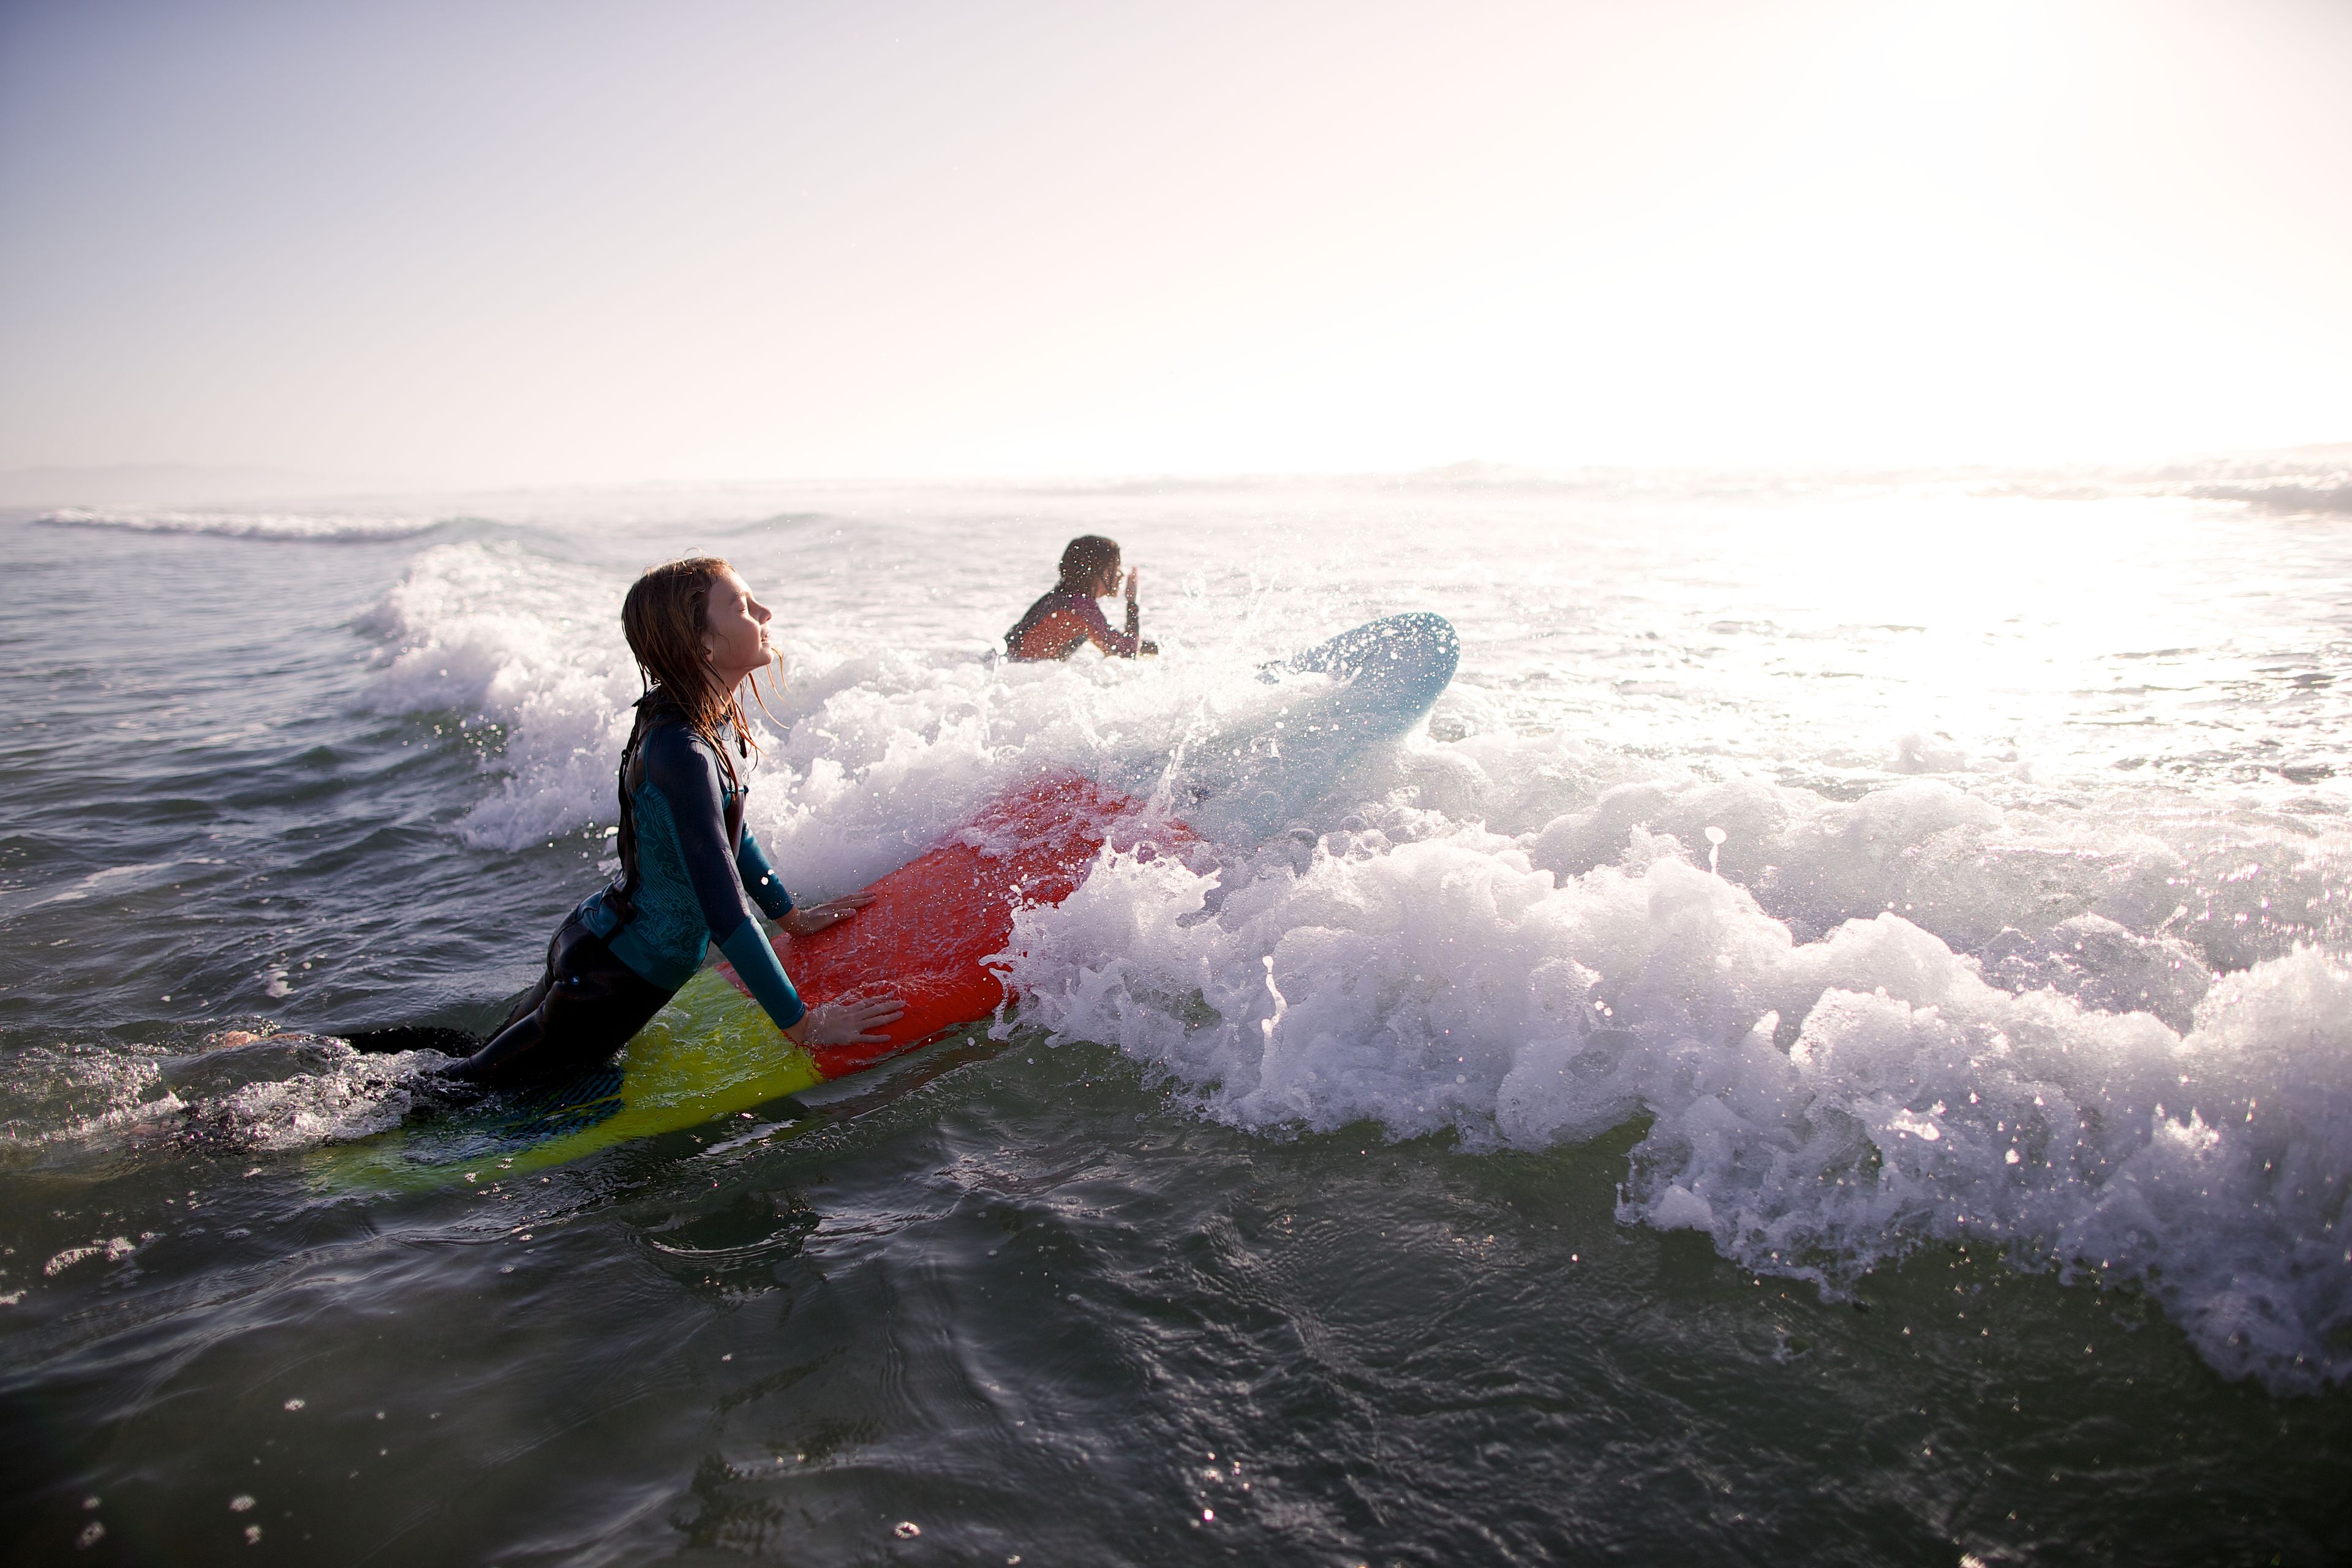 Two women paddle out on surfboards.